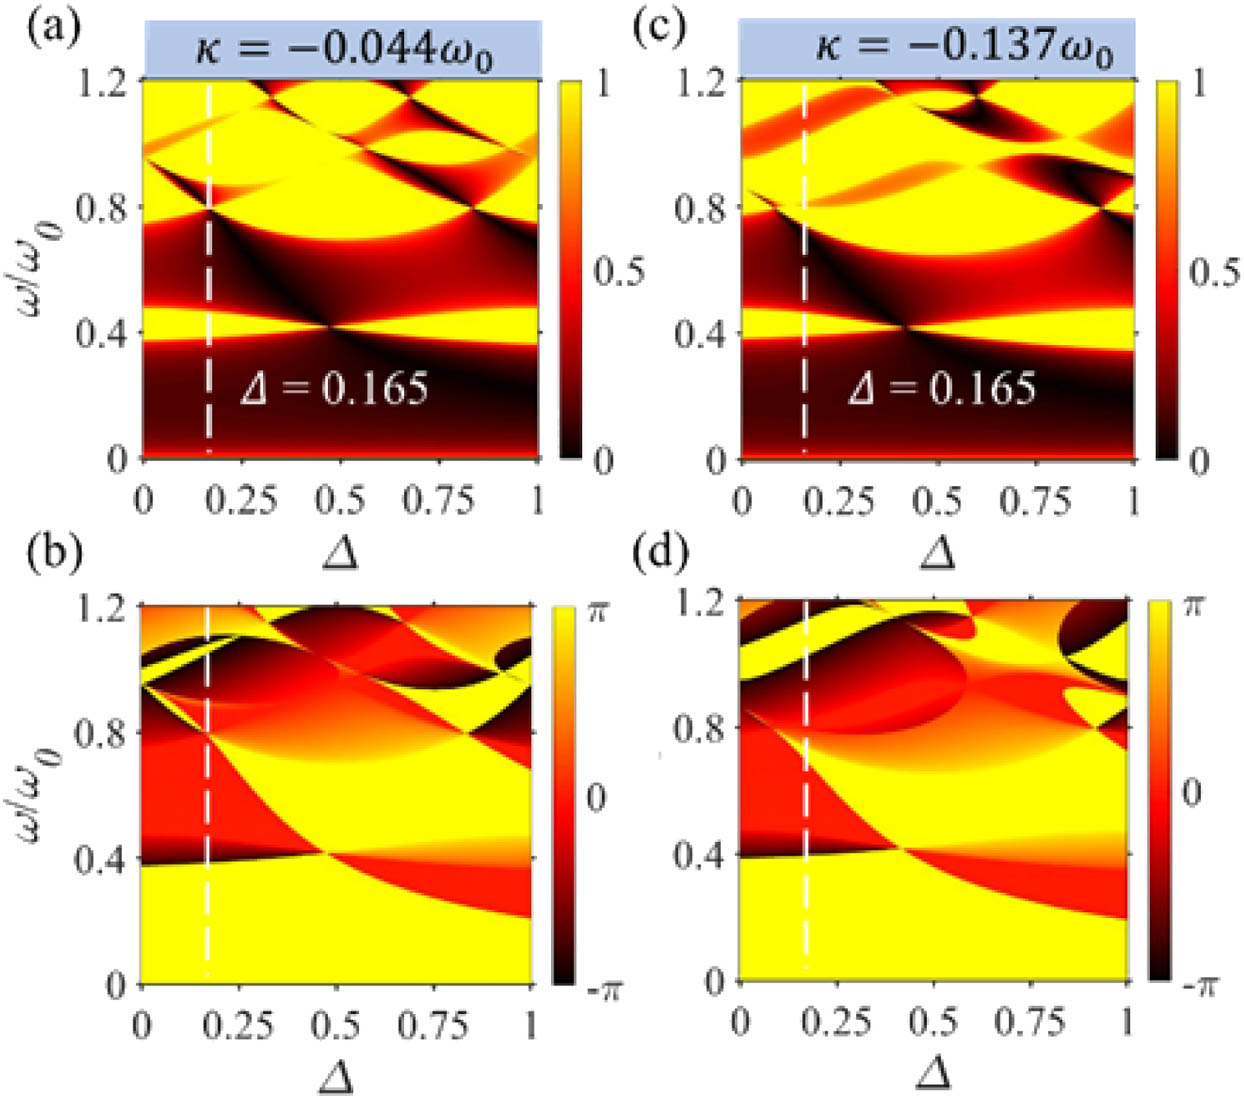 (a) Reflectivity and (b) reflection phase of the semi-infinite 1D dimerized chain with intracell near-field coupling κ=−0.044ω0. Similarly, (c) and (d) are the reflectivity and reflection phase of the 1D chain with the near-field coupling κ=−0.137ω0. For a fixed dimerized parameter Δ=0.165 indicated by the white dashed lines in (a)–(d), the second band gap closes in (a) and reopens in (c).